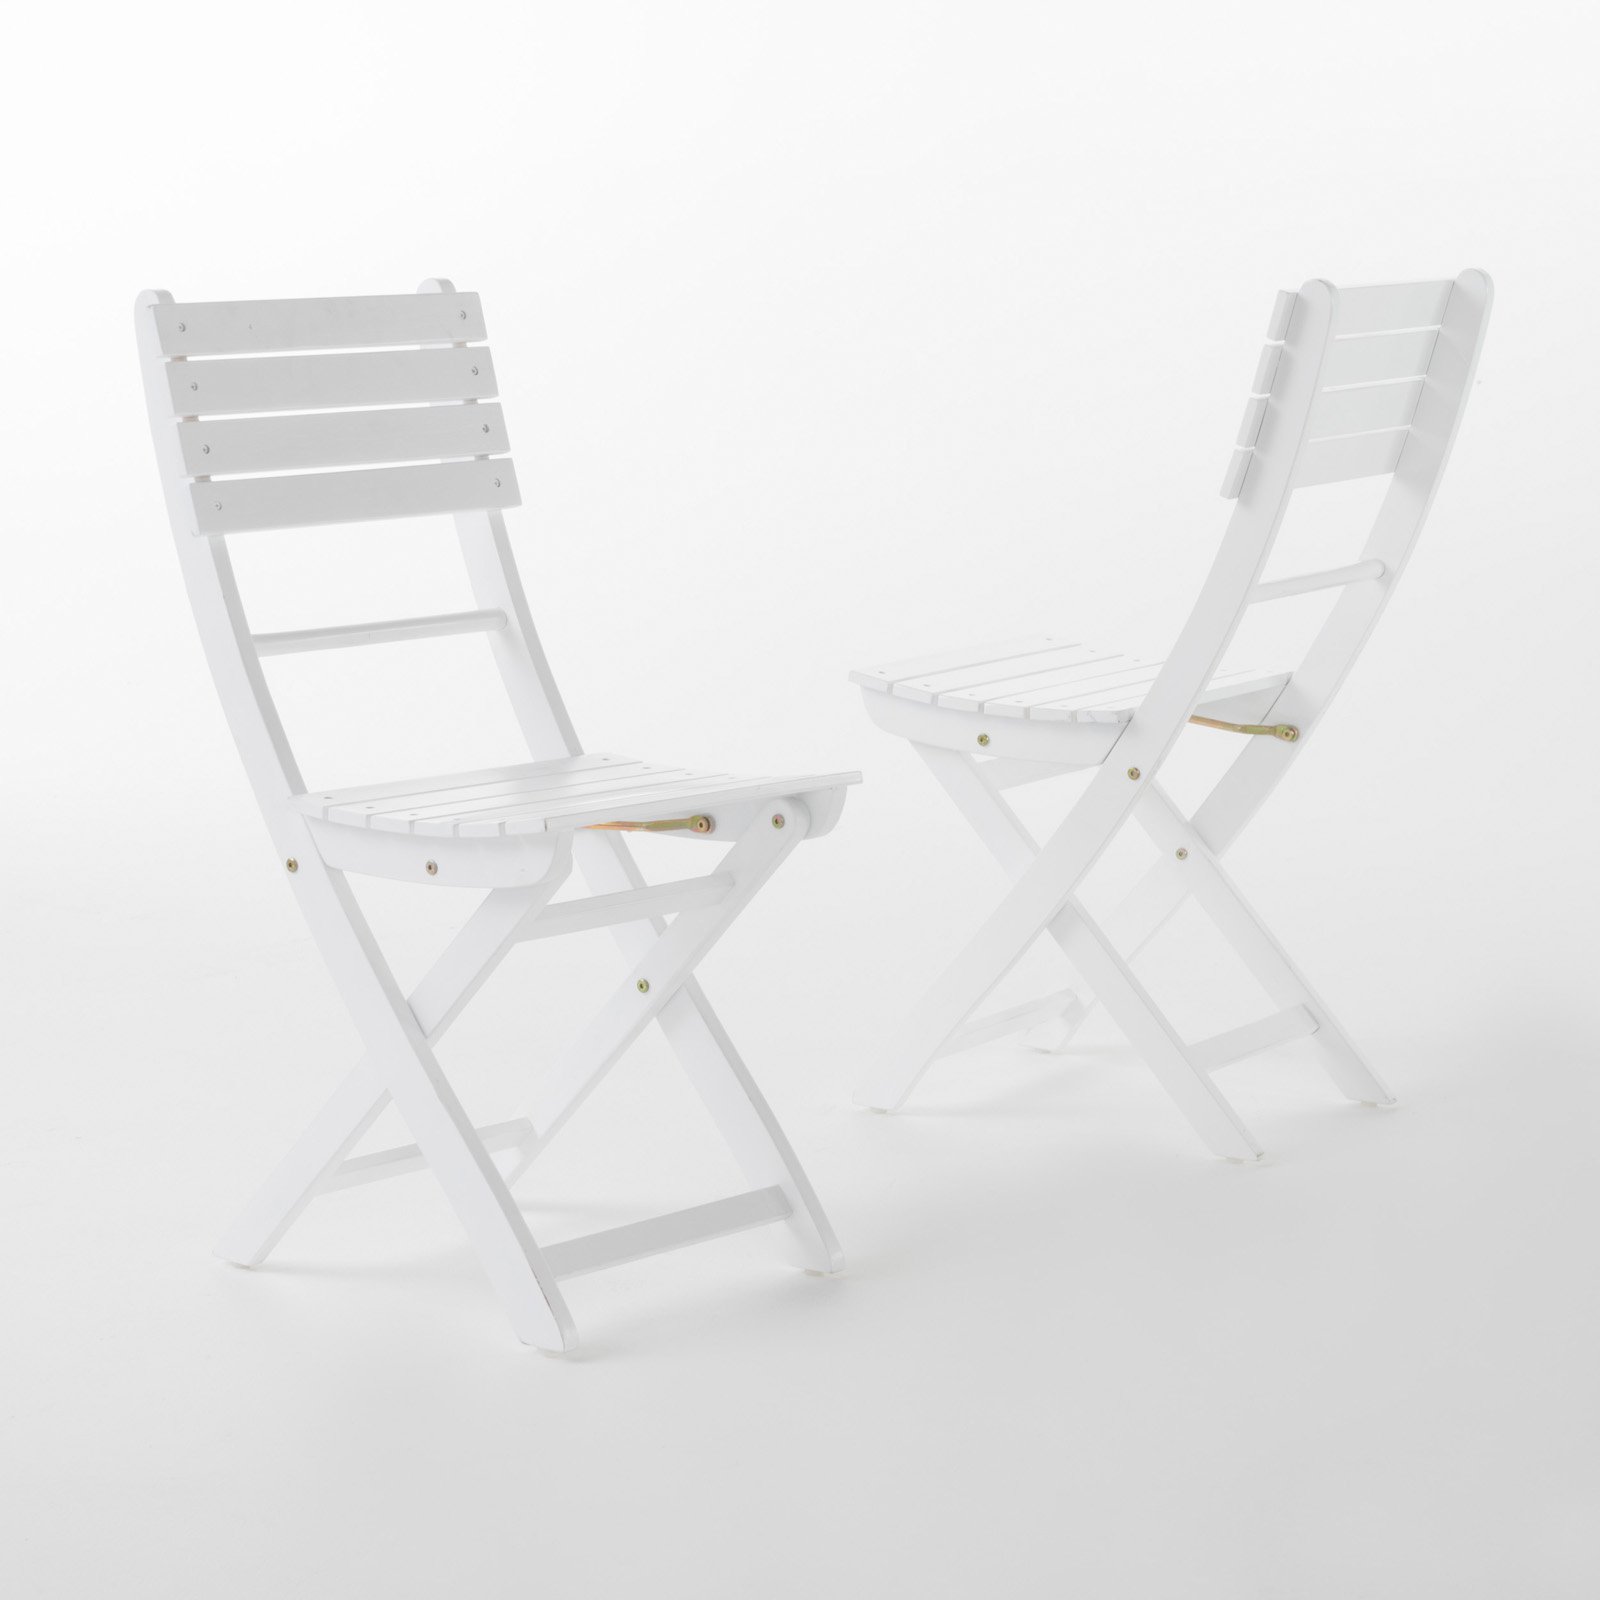 Pablo Acacia Wood Foldable Patio Dining Chairs - image 1 of 11